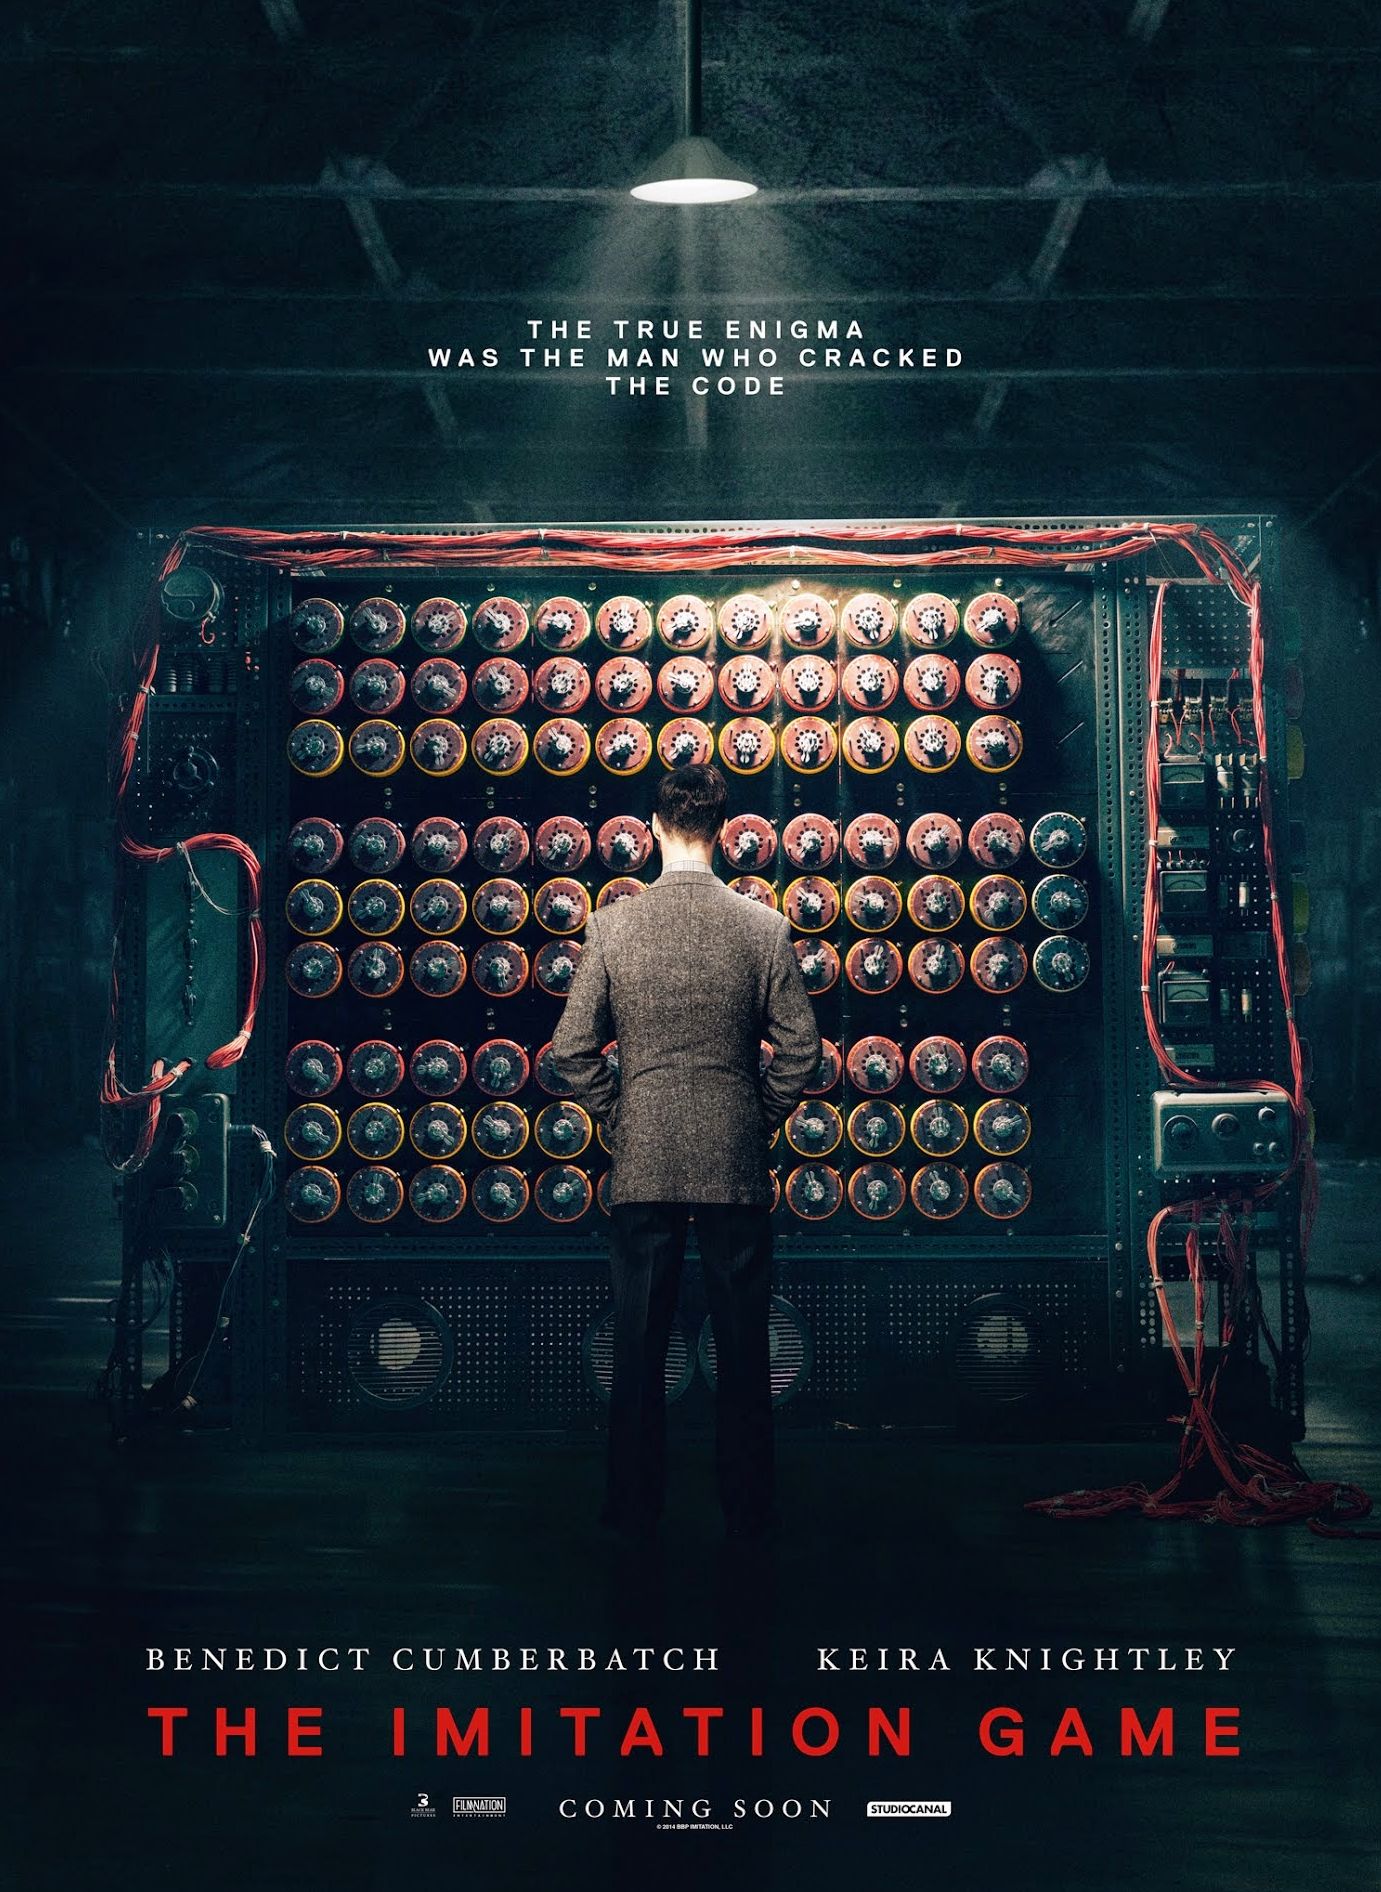 The Imitation Game poster: The True Enigma Was The Man Who C